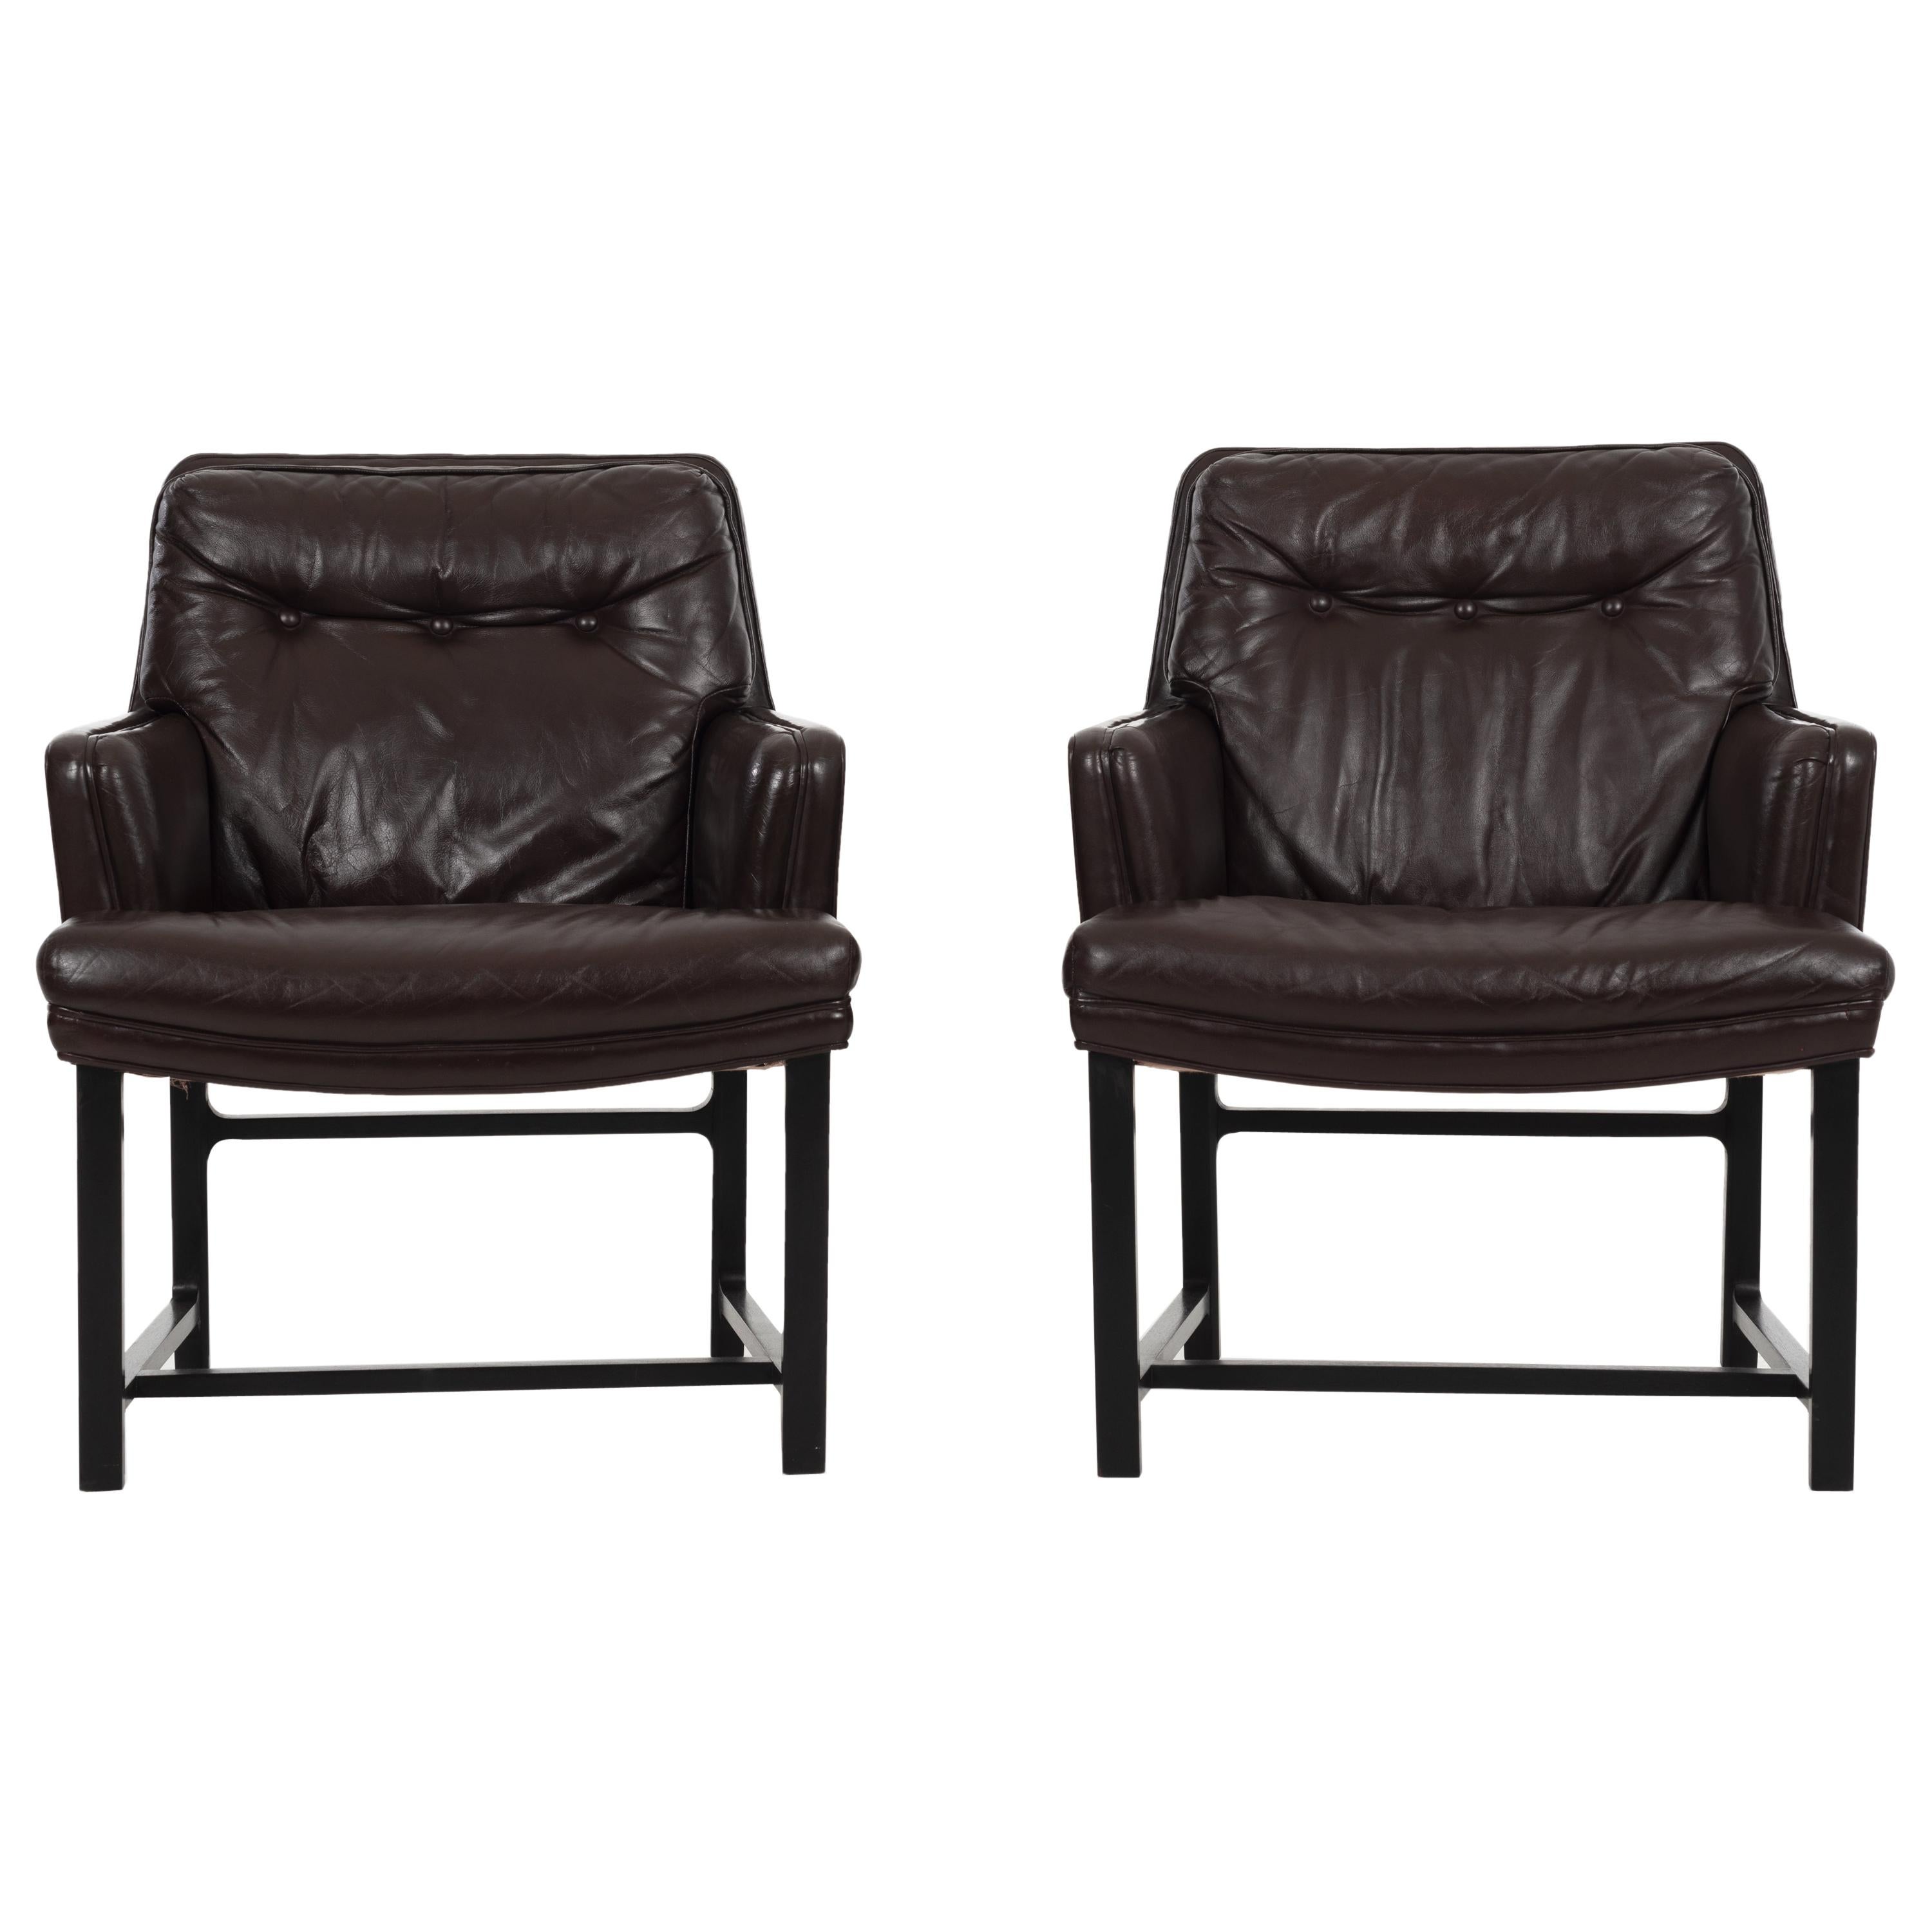 Pair of Edward Wormley for Dunbar Pull-Up Lounge Chairs